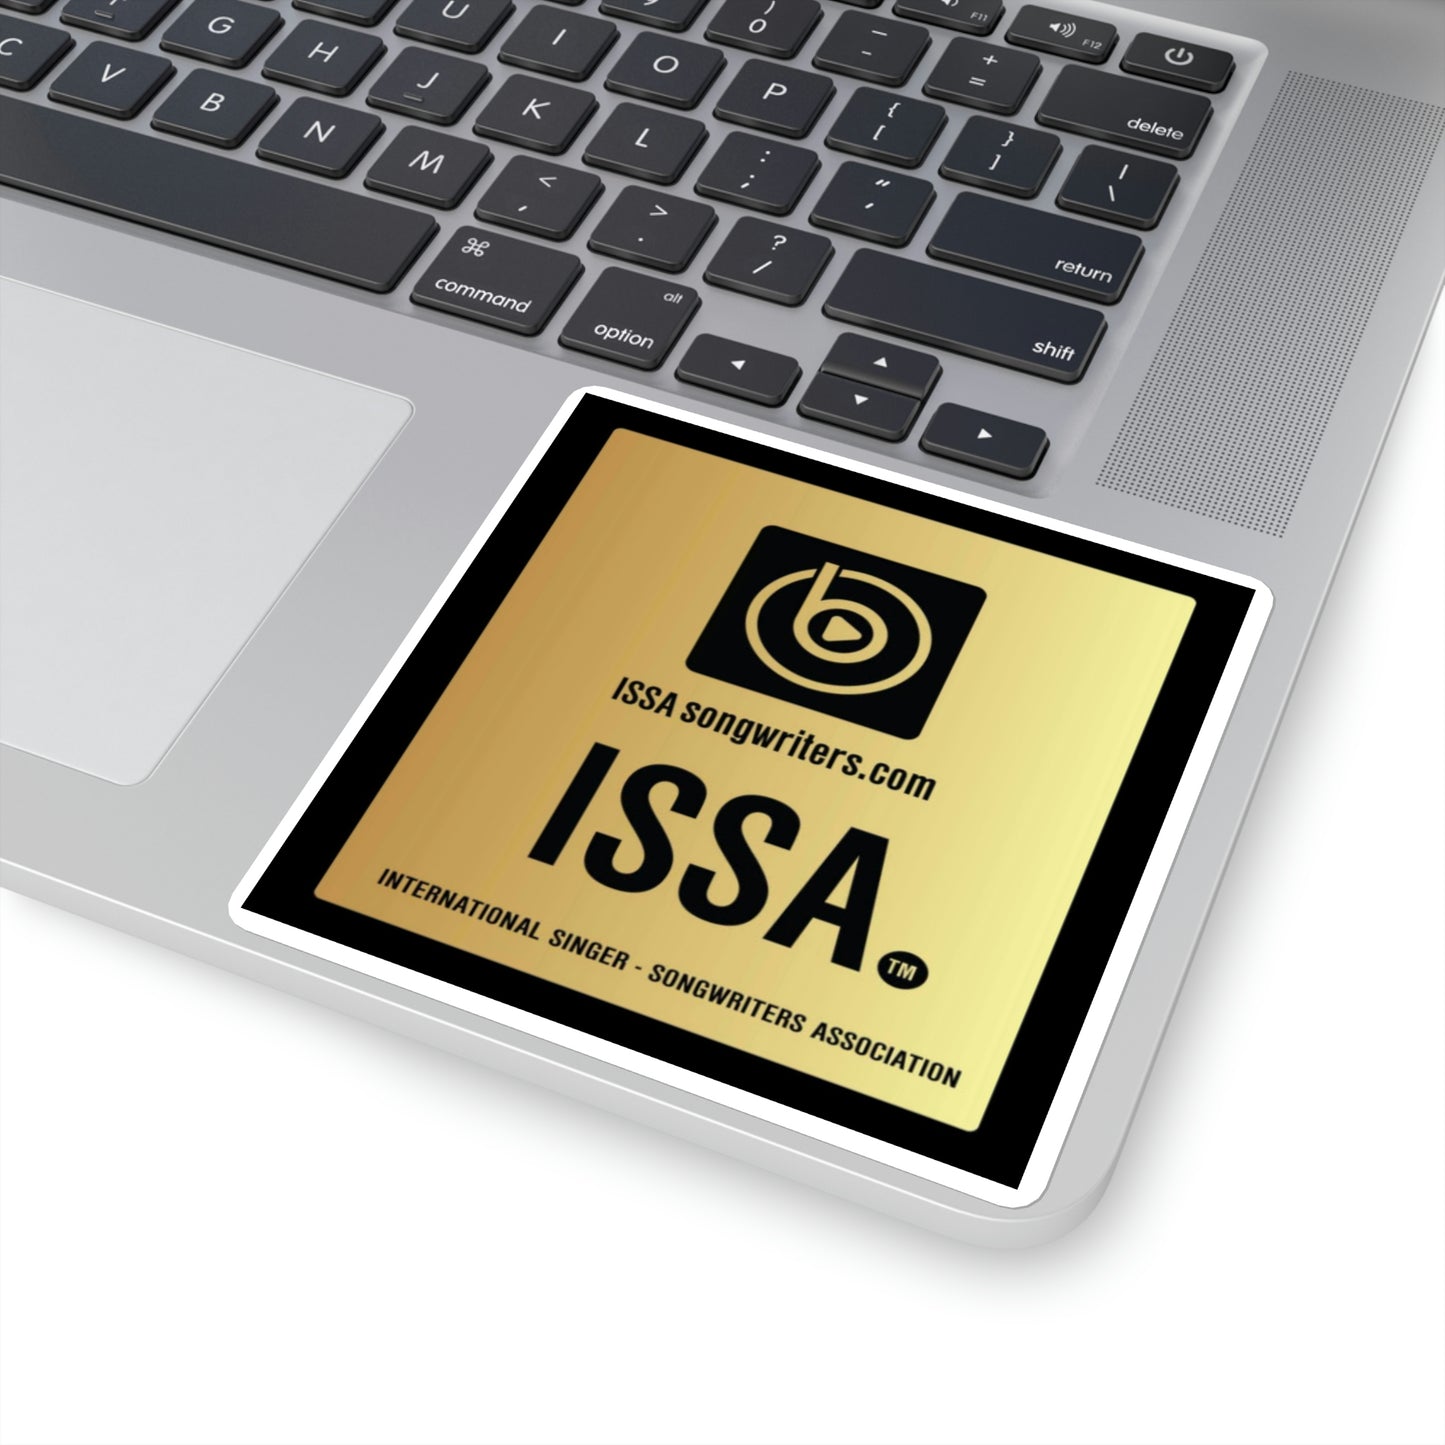 Official ISSA Guitar Case and Bumper Square Stickers